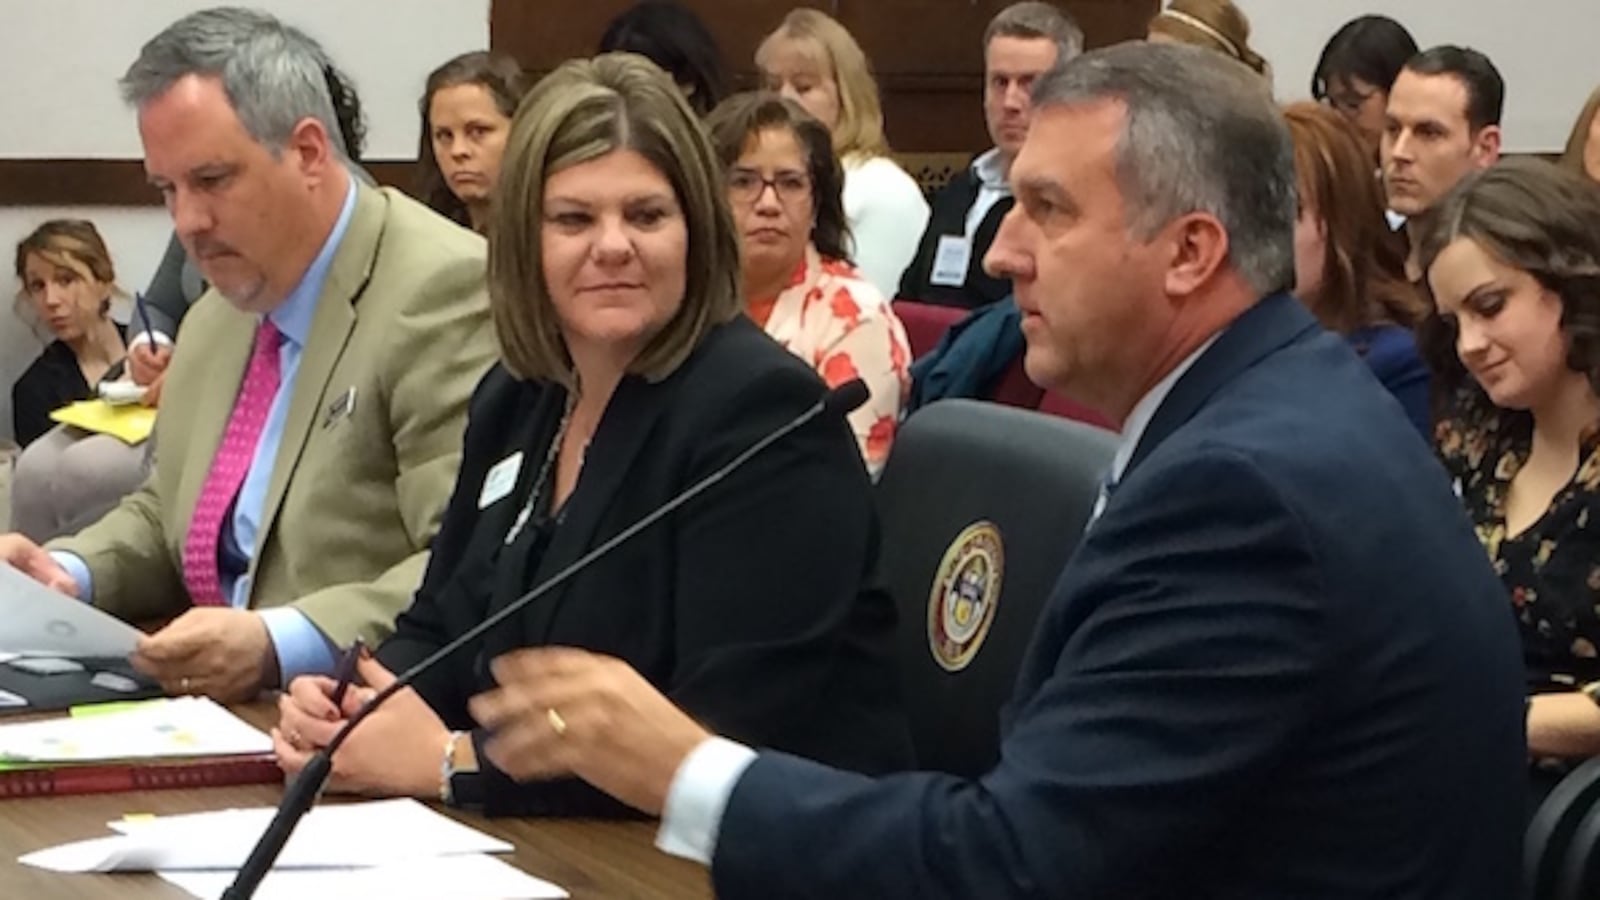 Education Commissioner Richard Crandall (right) talks about teacher recruitment with the Senate Education Committee. Also speaking were Richard Mitchell of the Department of Higher Education (left) and Colleen O’Neil of the Department of Education.